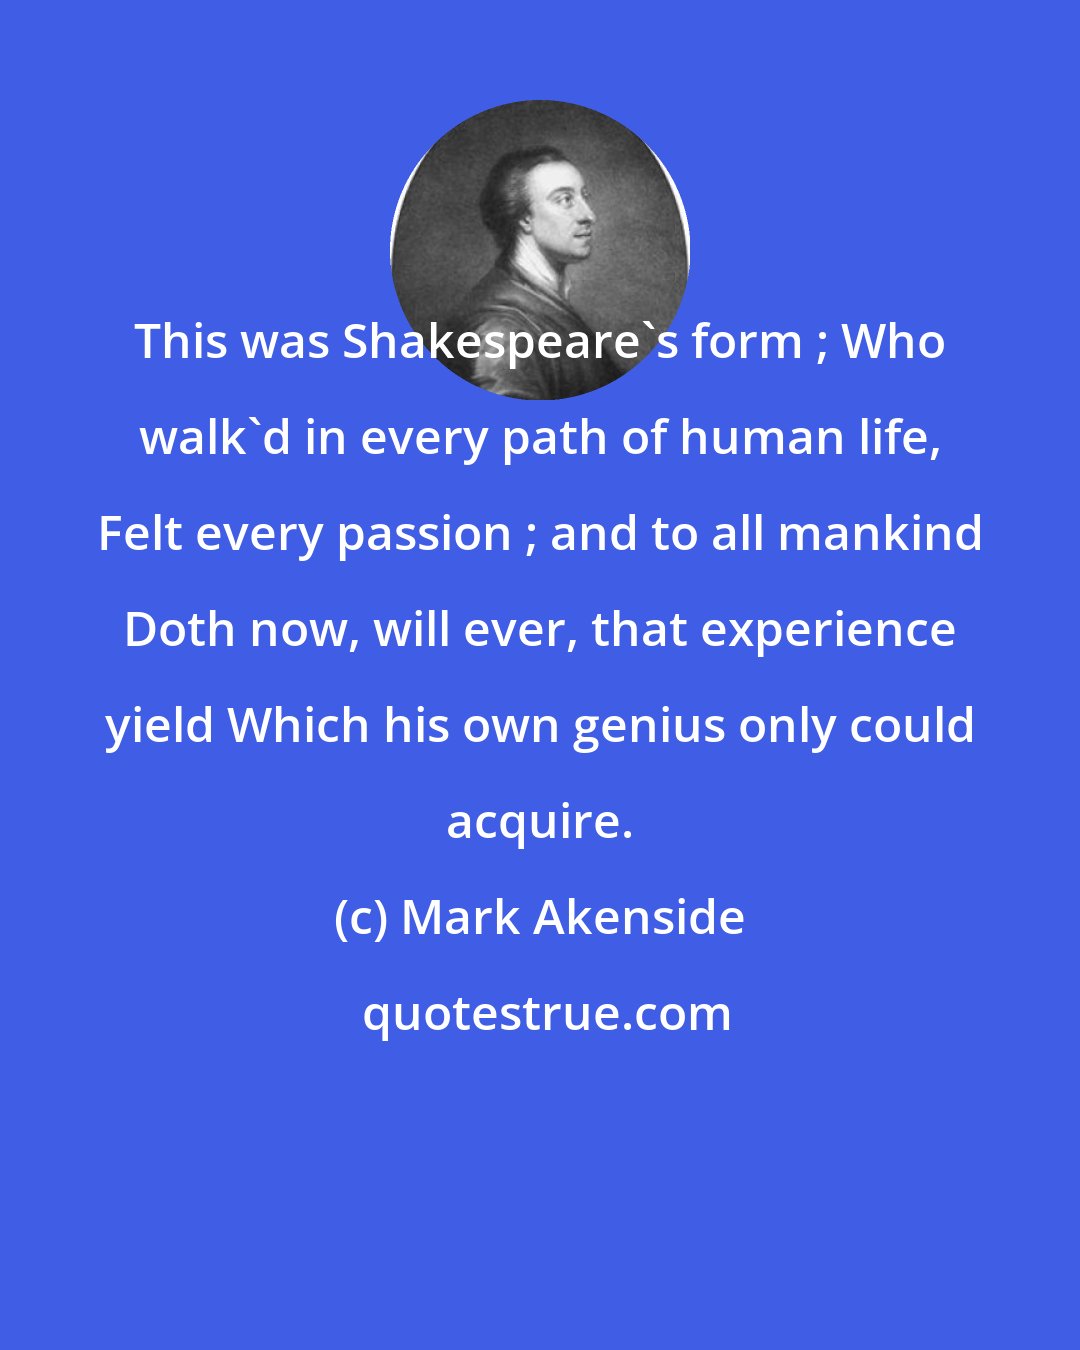 Mark Akenside: This was Shakespeare's form ; Who walk'd in every path of human life, Felt every passion ; and to all mankind Doth now, will ever, that experience yield Which his own genius only could acquire.